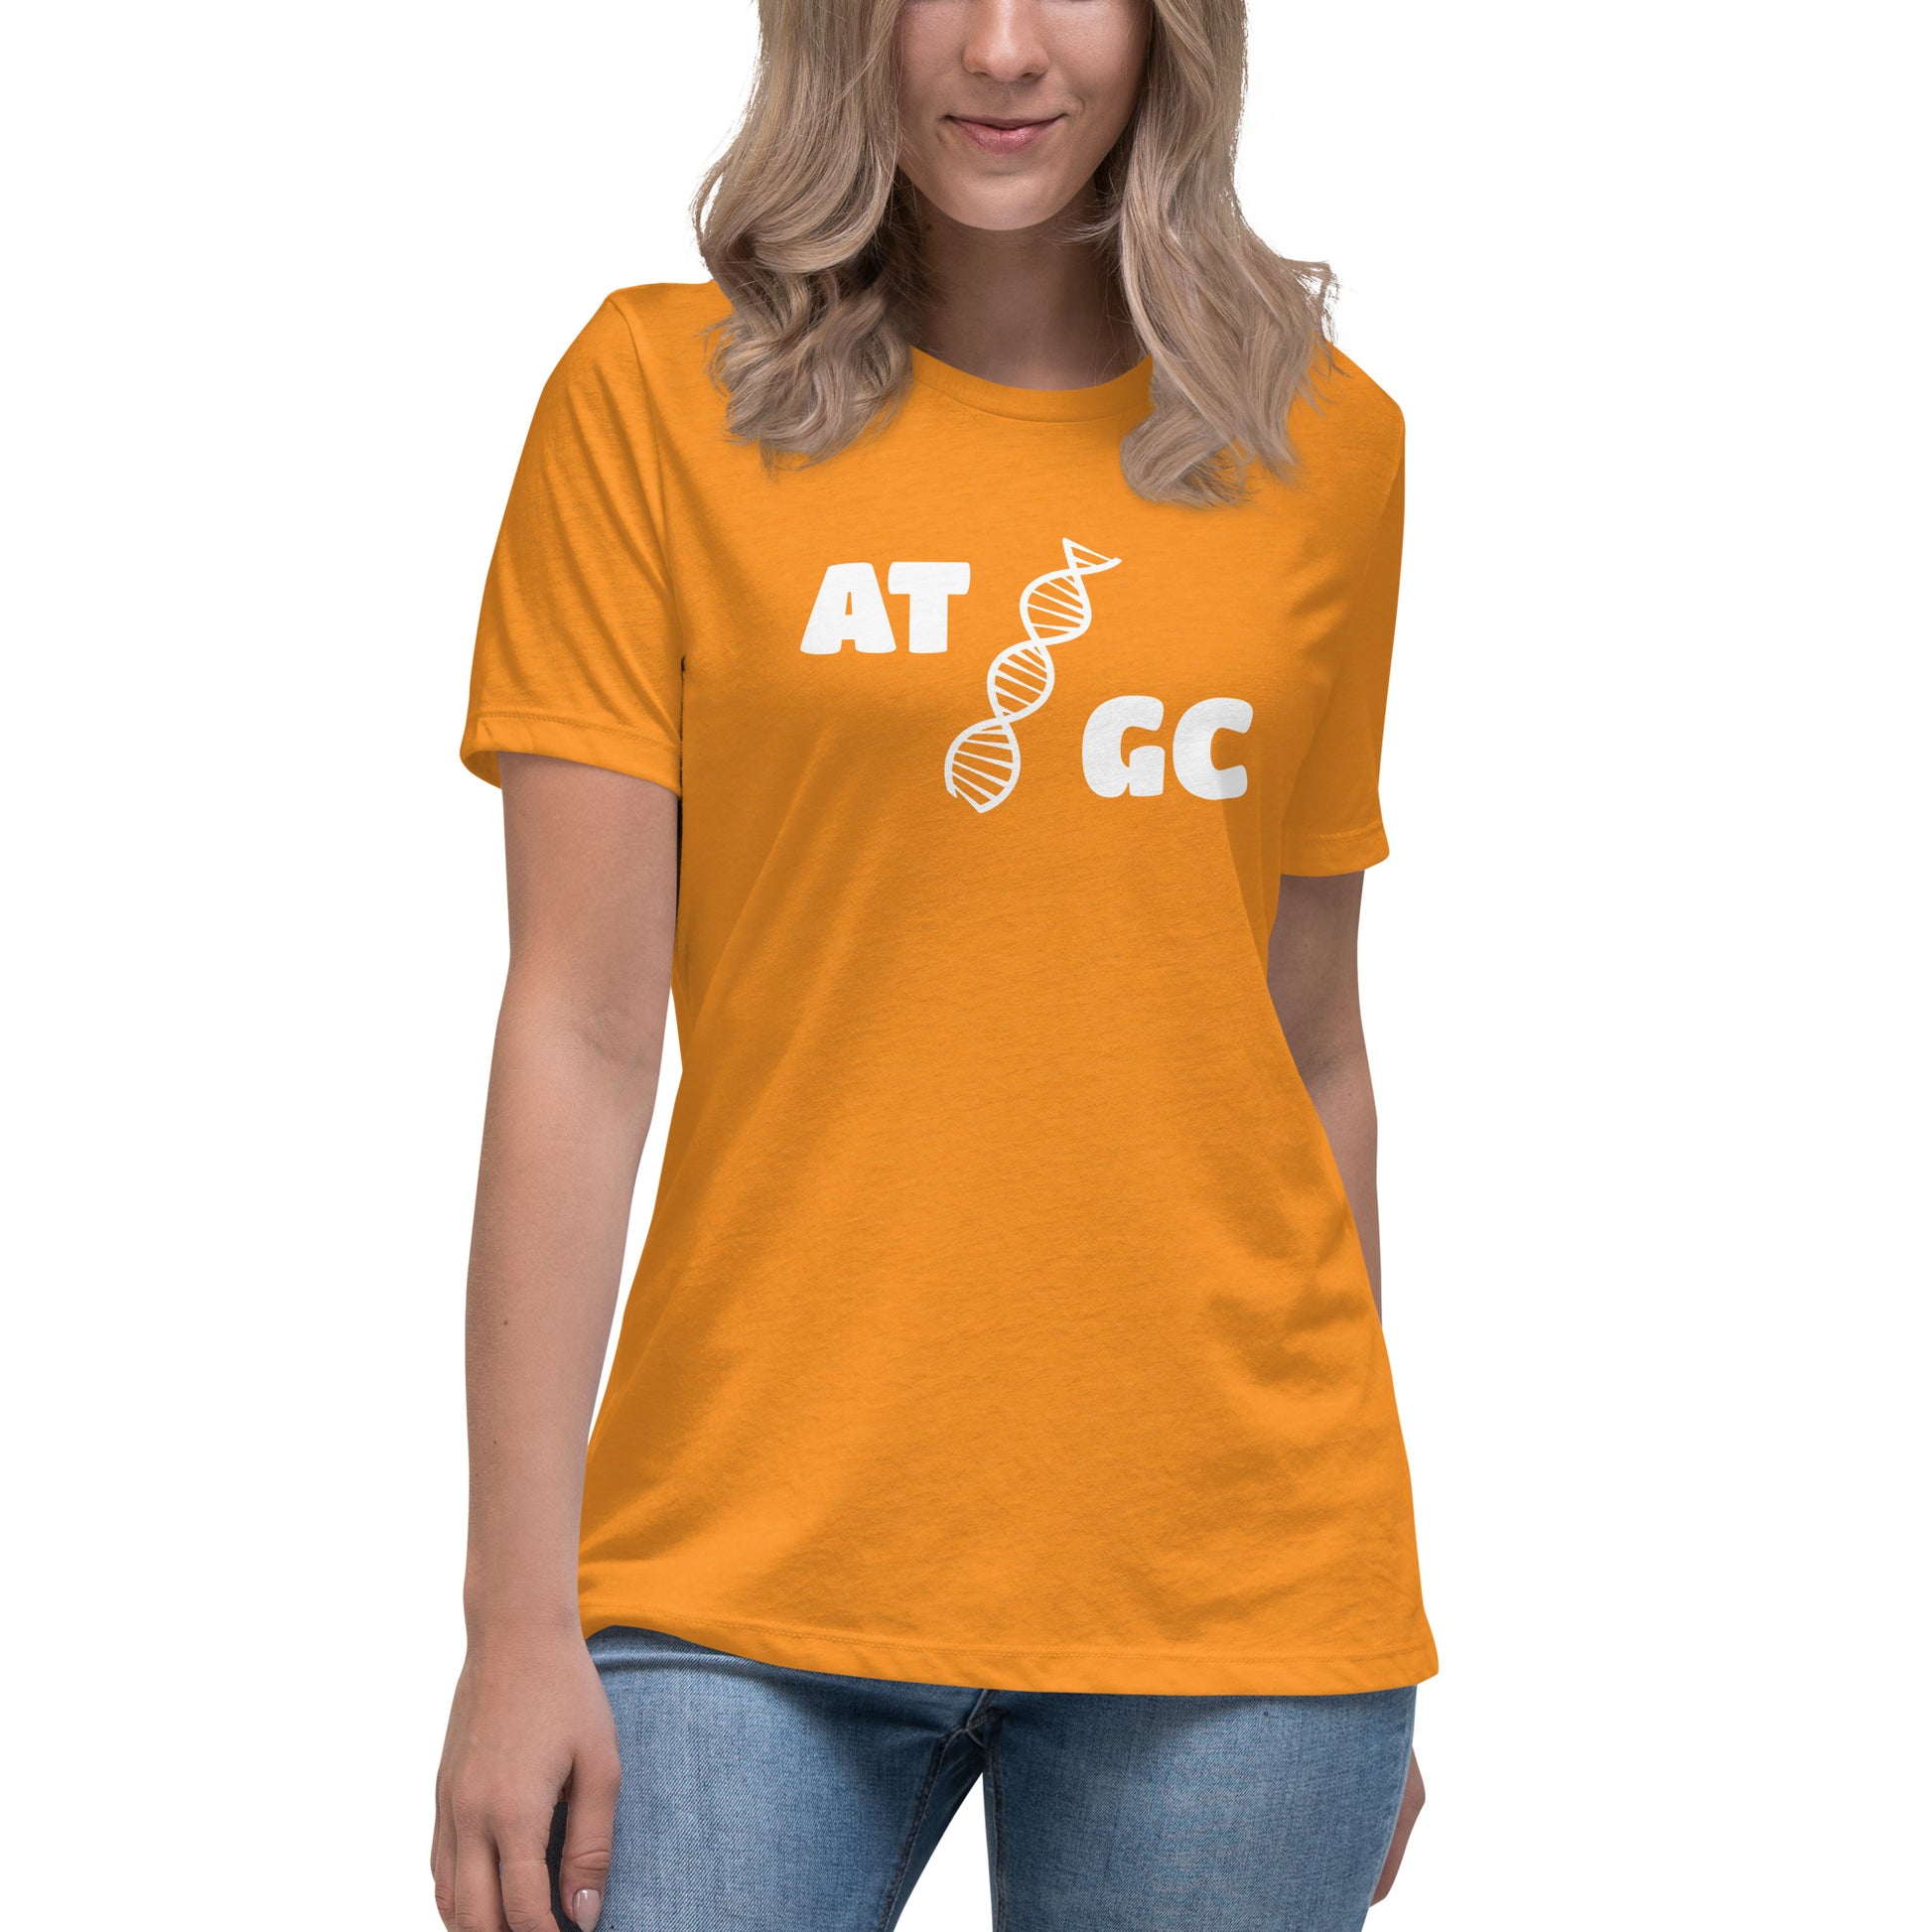 Women with marmalade t-shirt with image of a DNA string and the text "ATGC"